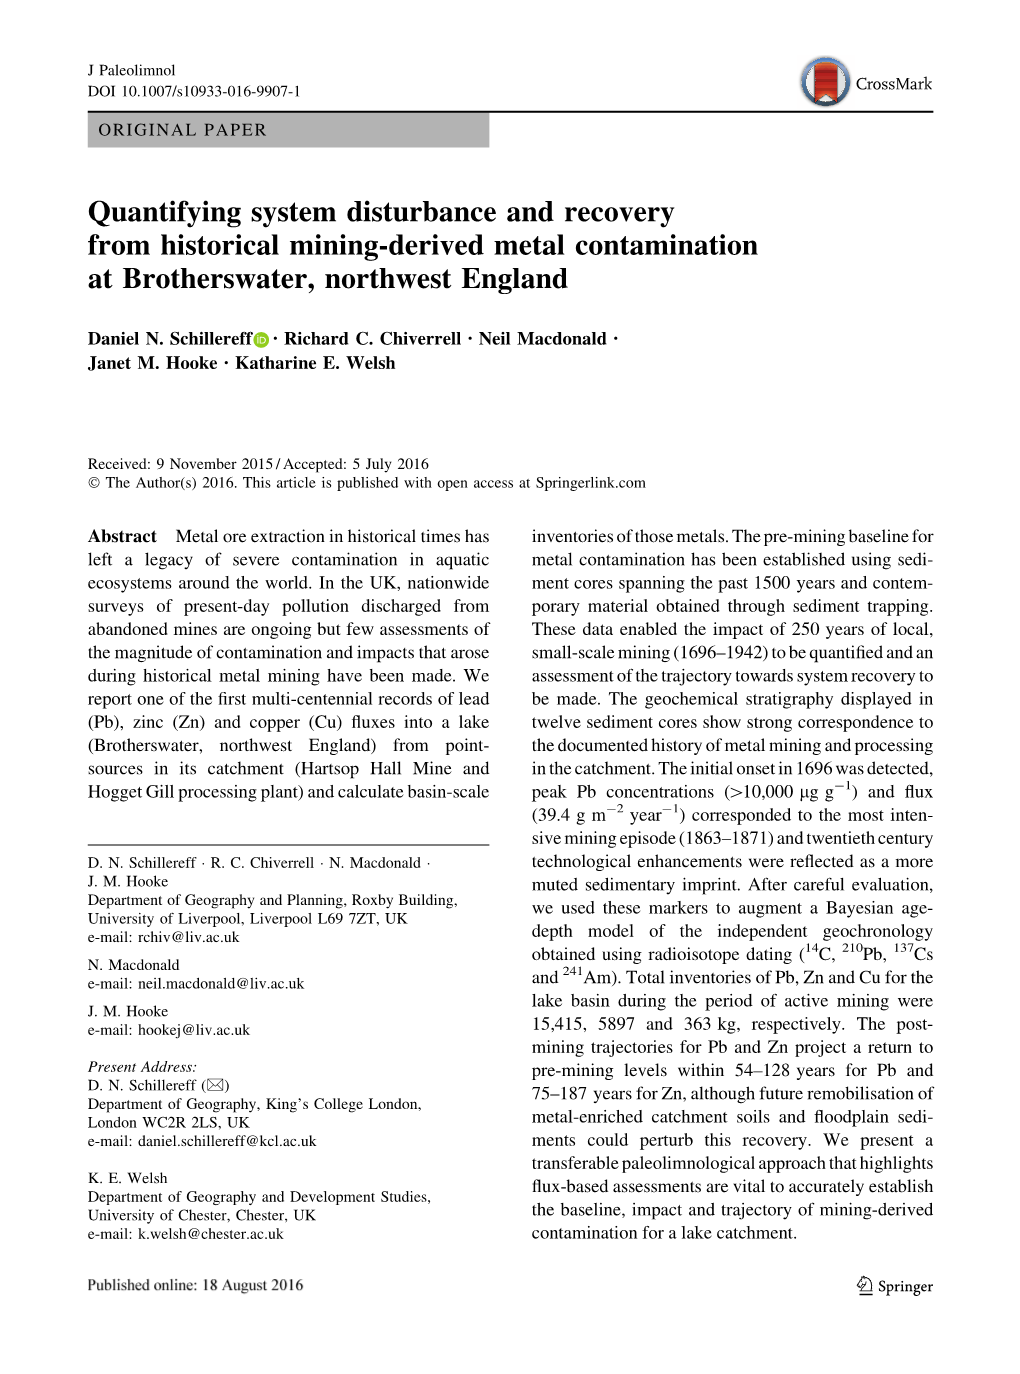 Quantifying System Disturbance and Recovery from Historical Mining-Derived Metal Contamination at Brotherswater, Northwest England